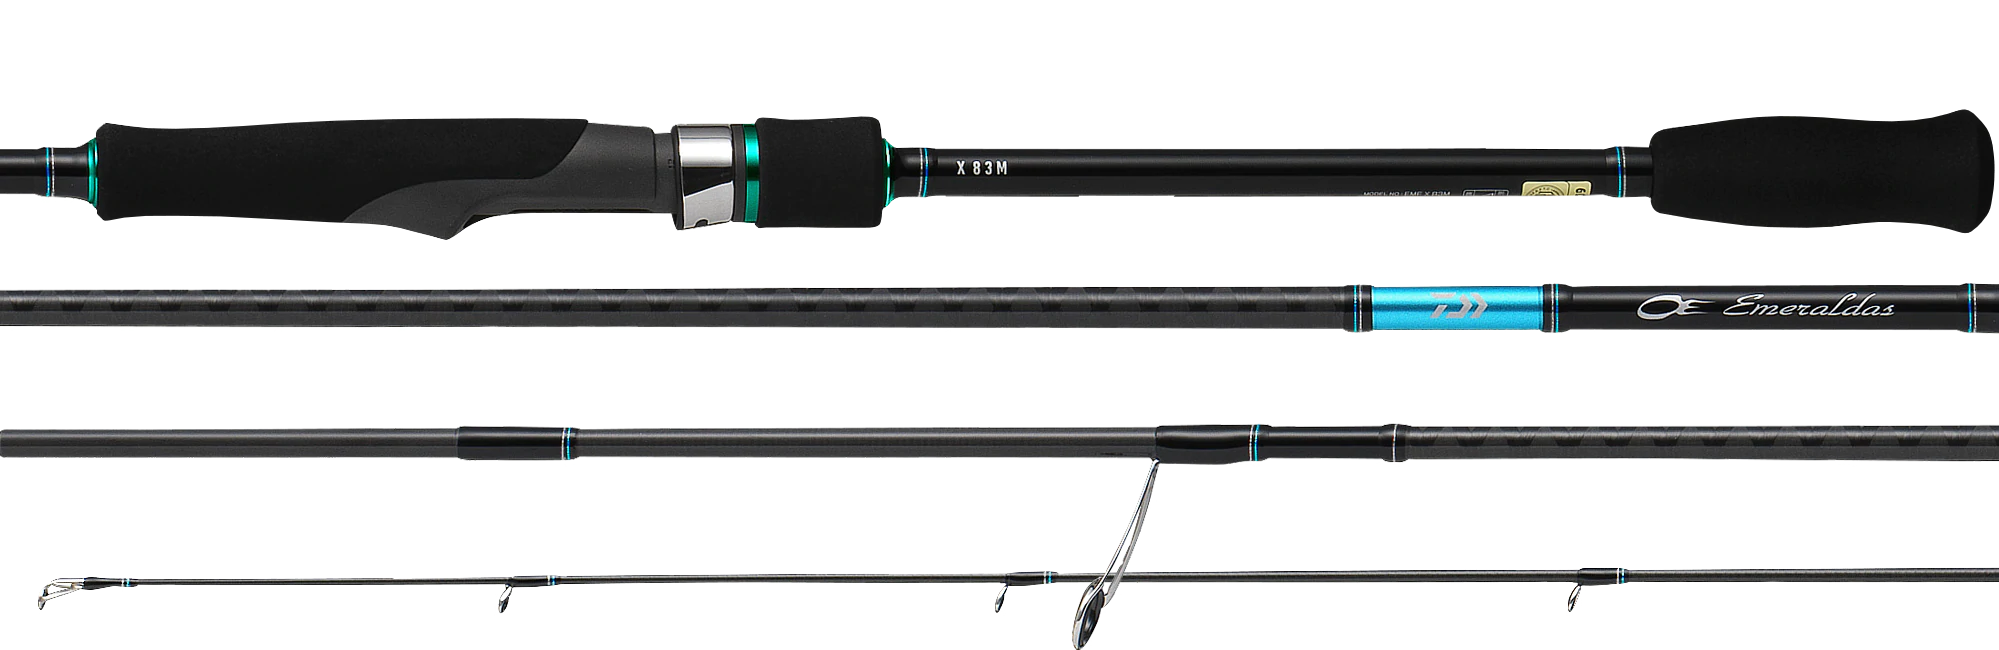 Daiwa Emeraldas X Spin Rods (Eging/Squid Game) - Compleat Angler Ringwood